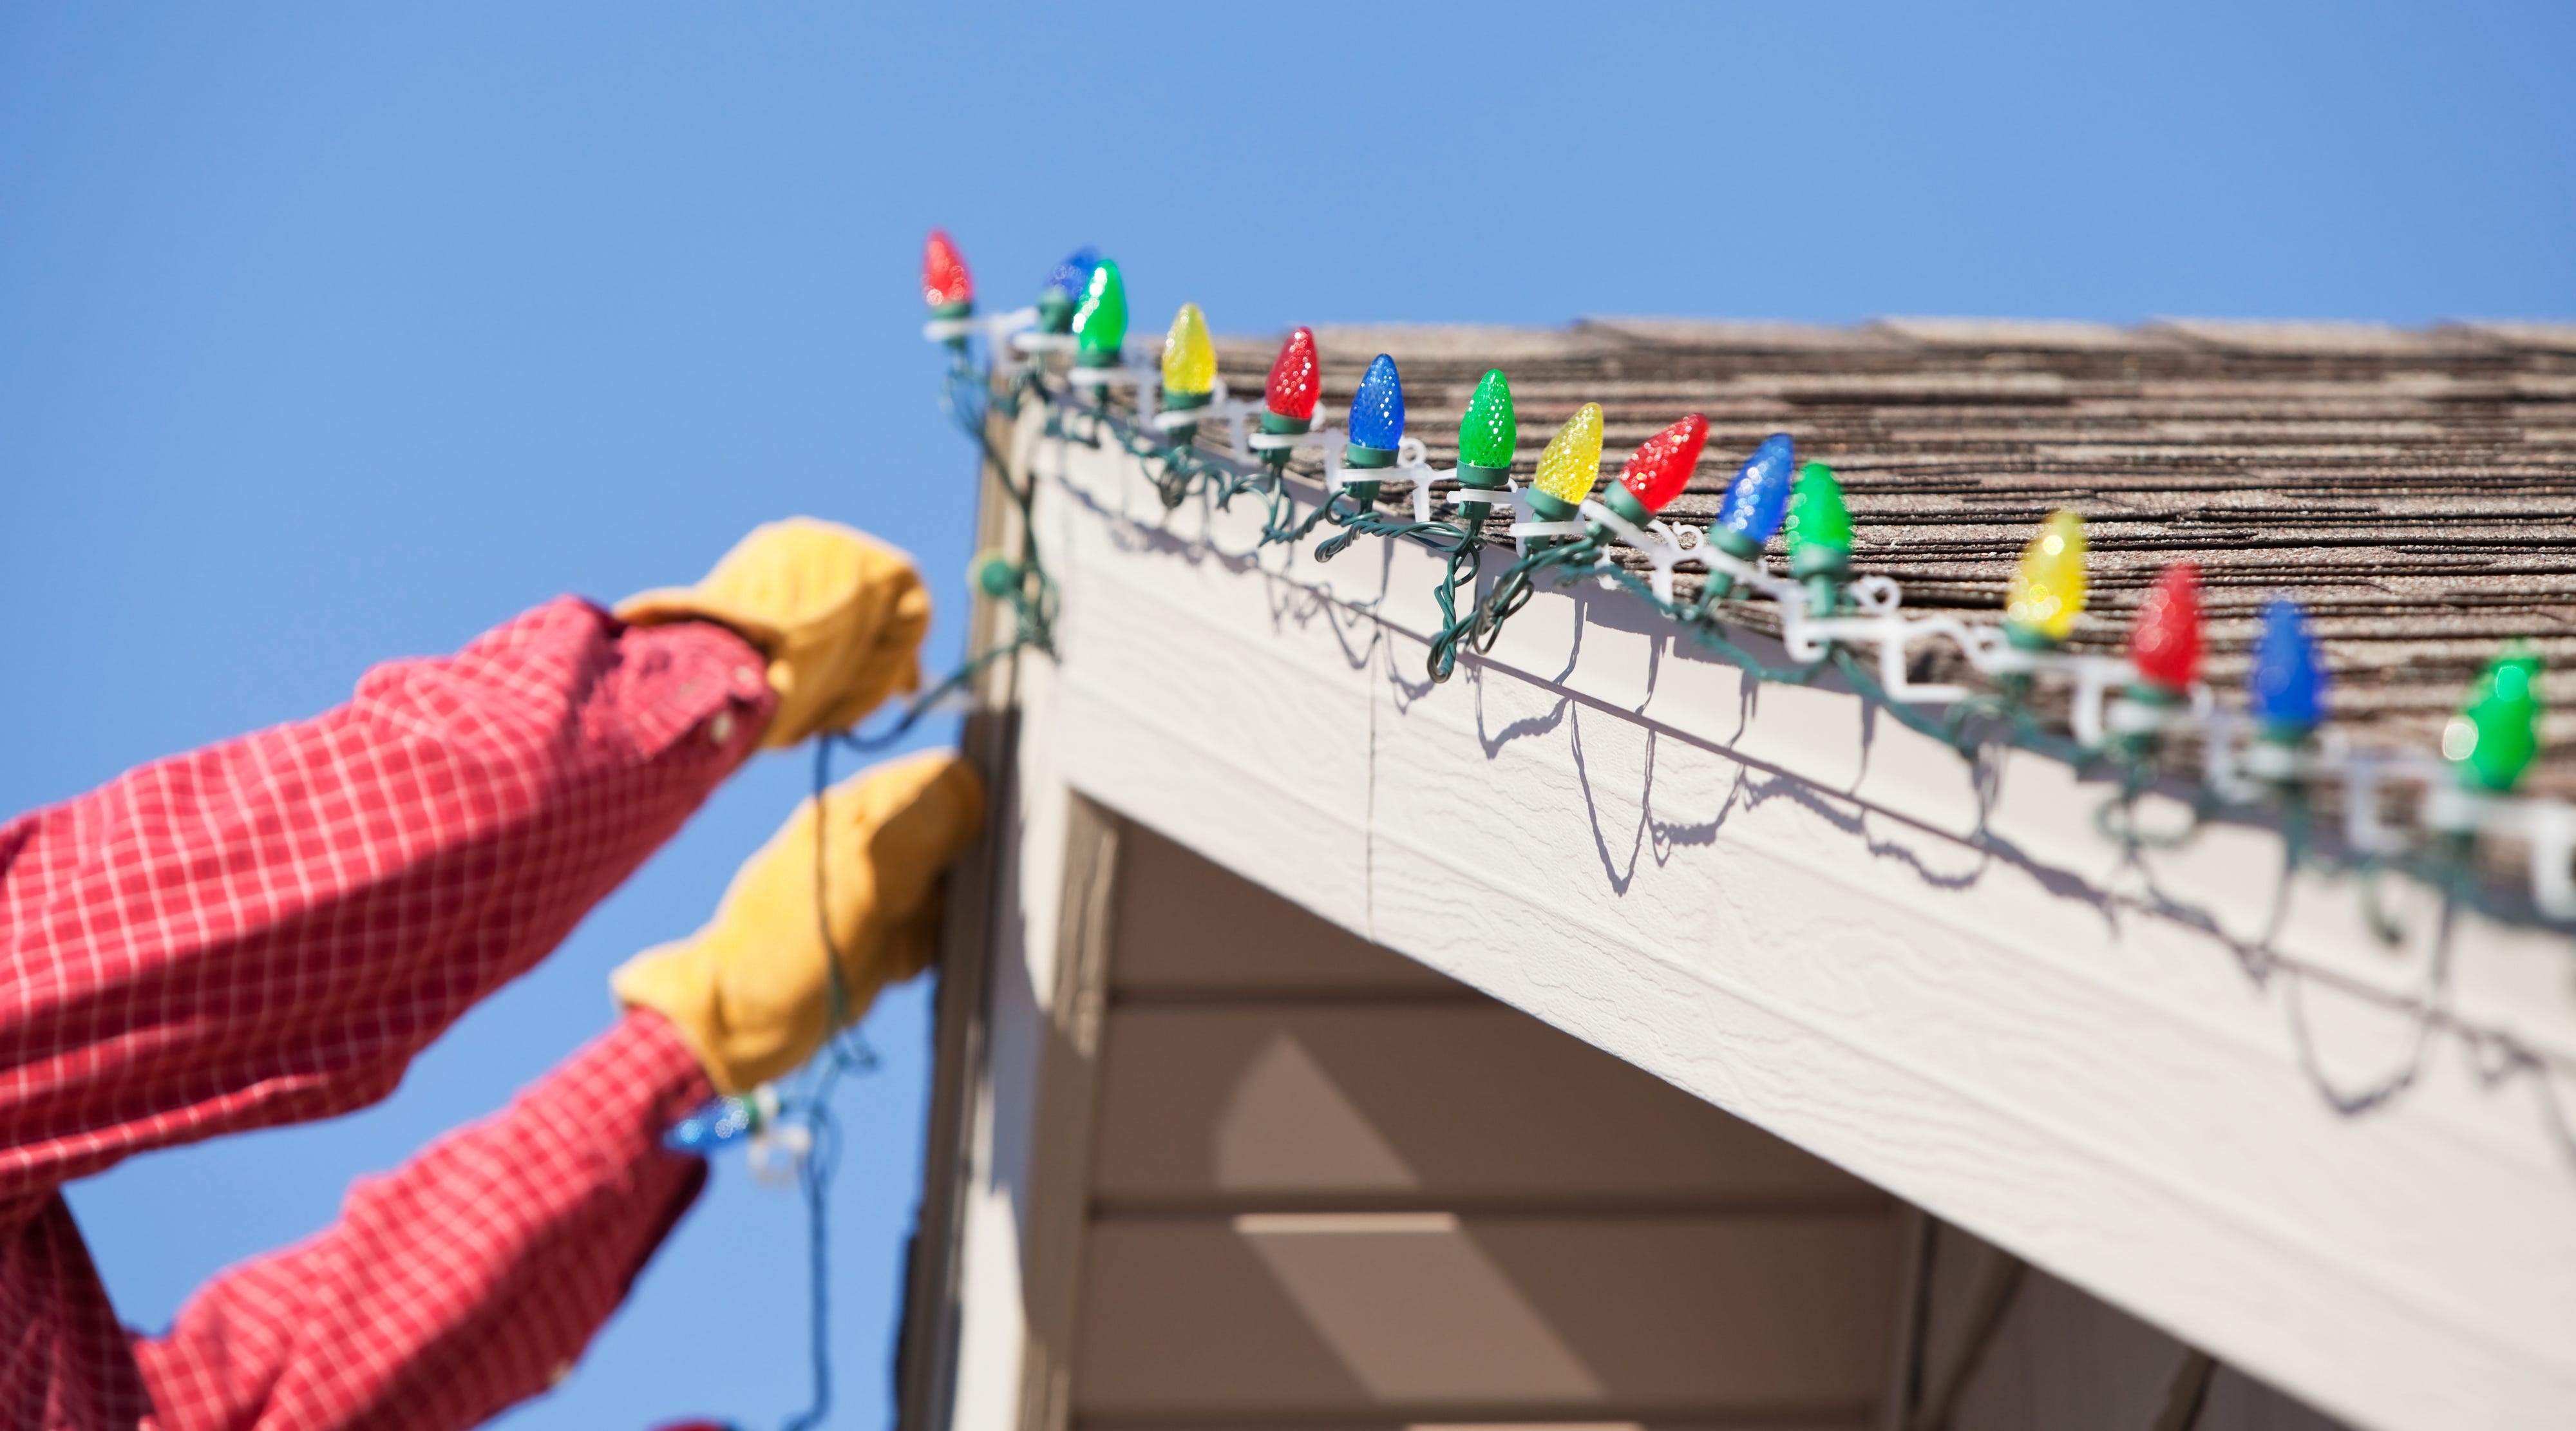 How to fix broken Christmas lights: Tips for solving common problems with string lights, burned-out bulbs